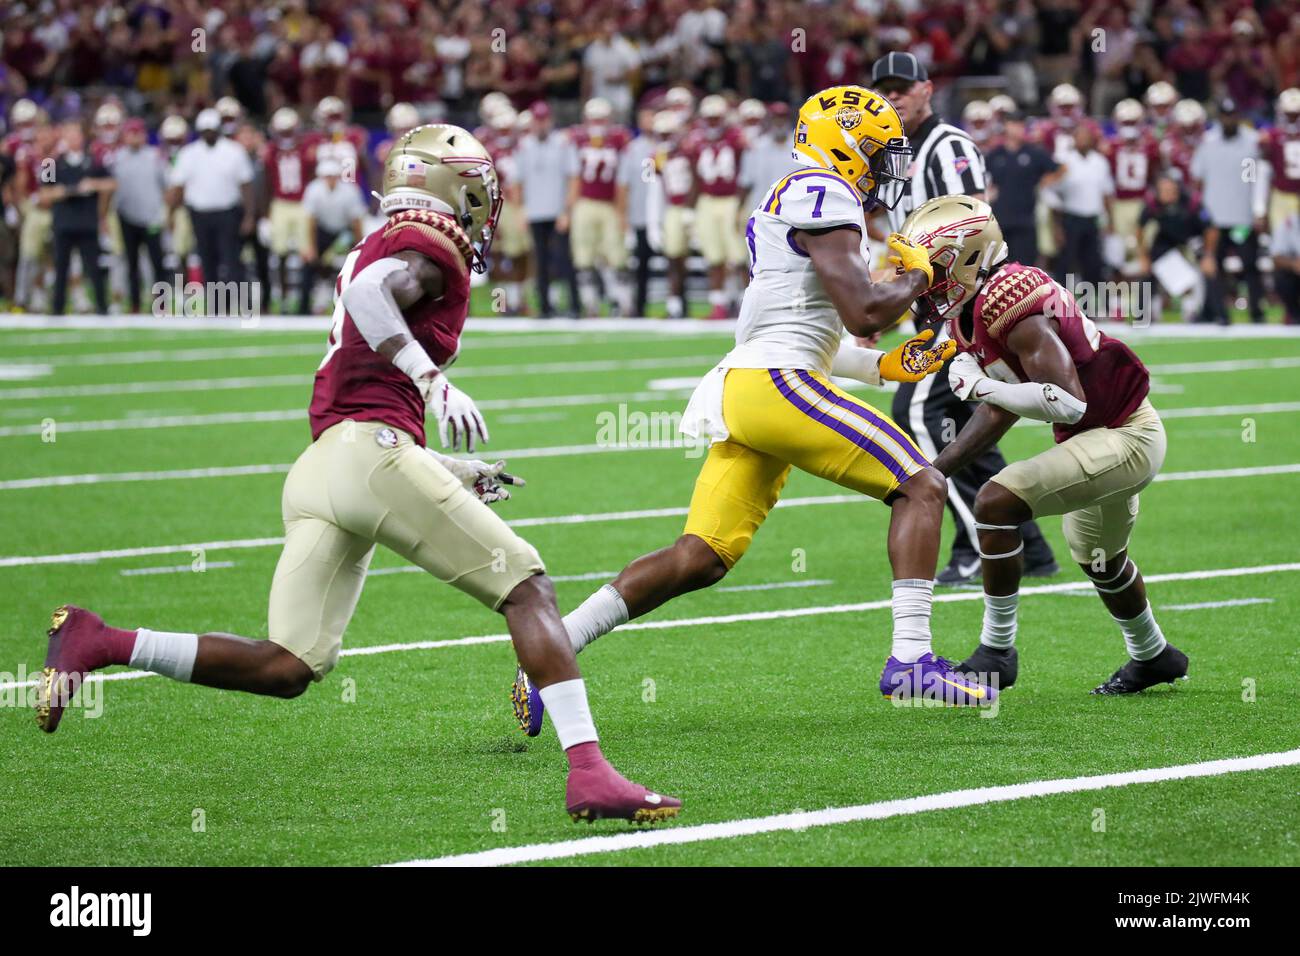 September 4, 2022: LSU wide receiver Kayshon Boutte (7) tries to bring in a pass between two Florida St. defenders during the Allstate Louisiana Kickoff Game between the Florida St. Seminoles and the LSU Tigers at the Caesars Superdome in New Orleans, LA. Jonathan Mailhes/CSM Stock Photo